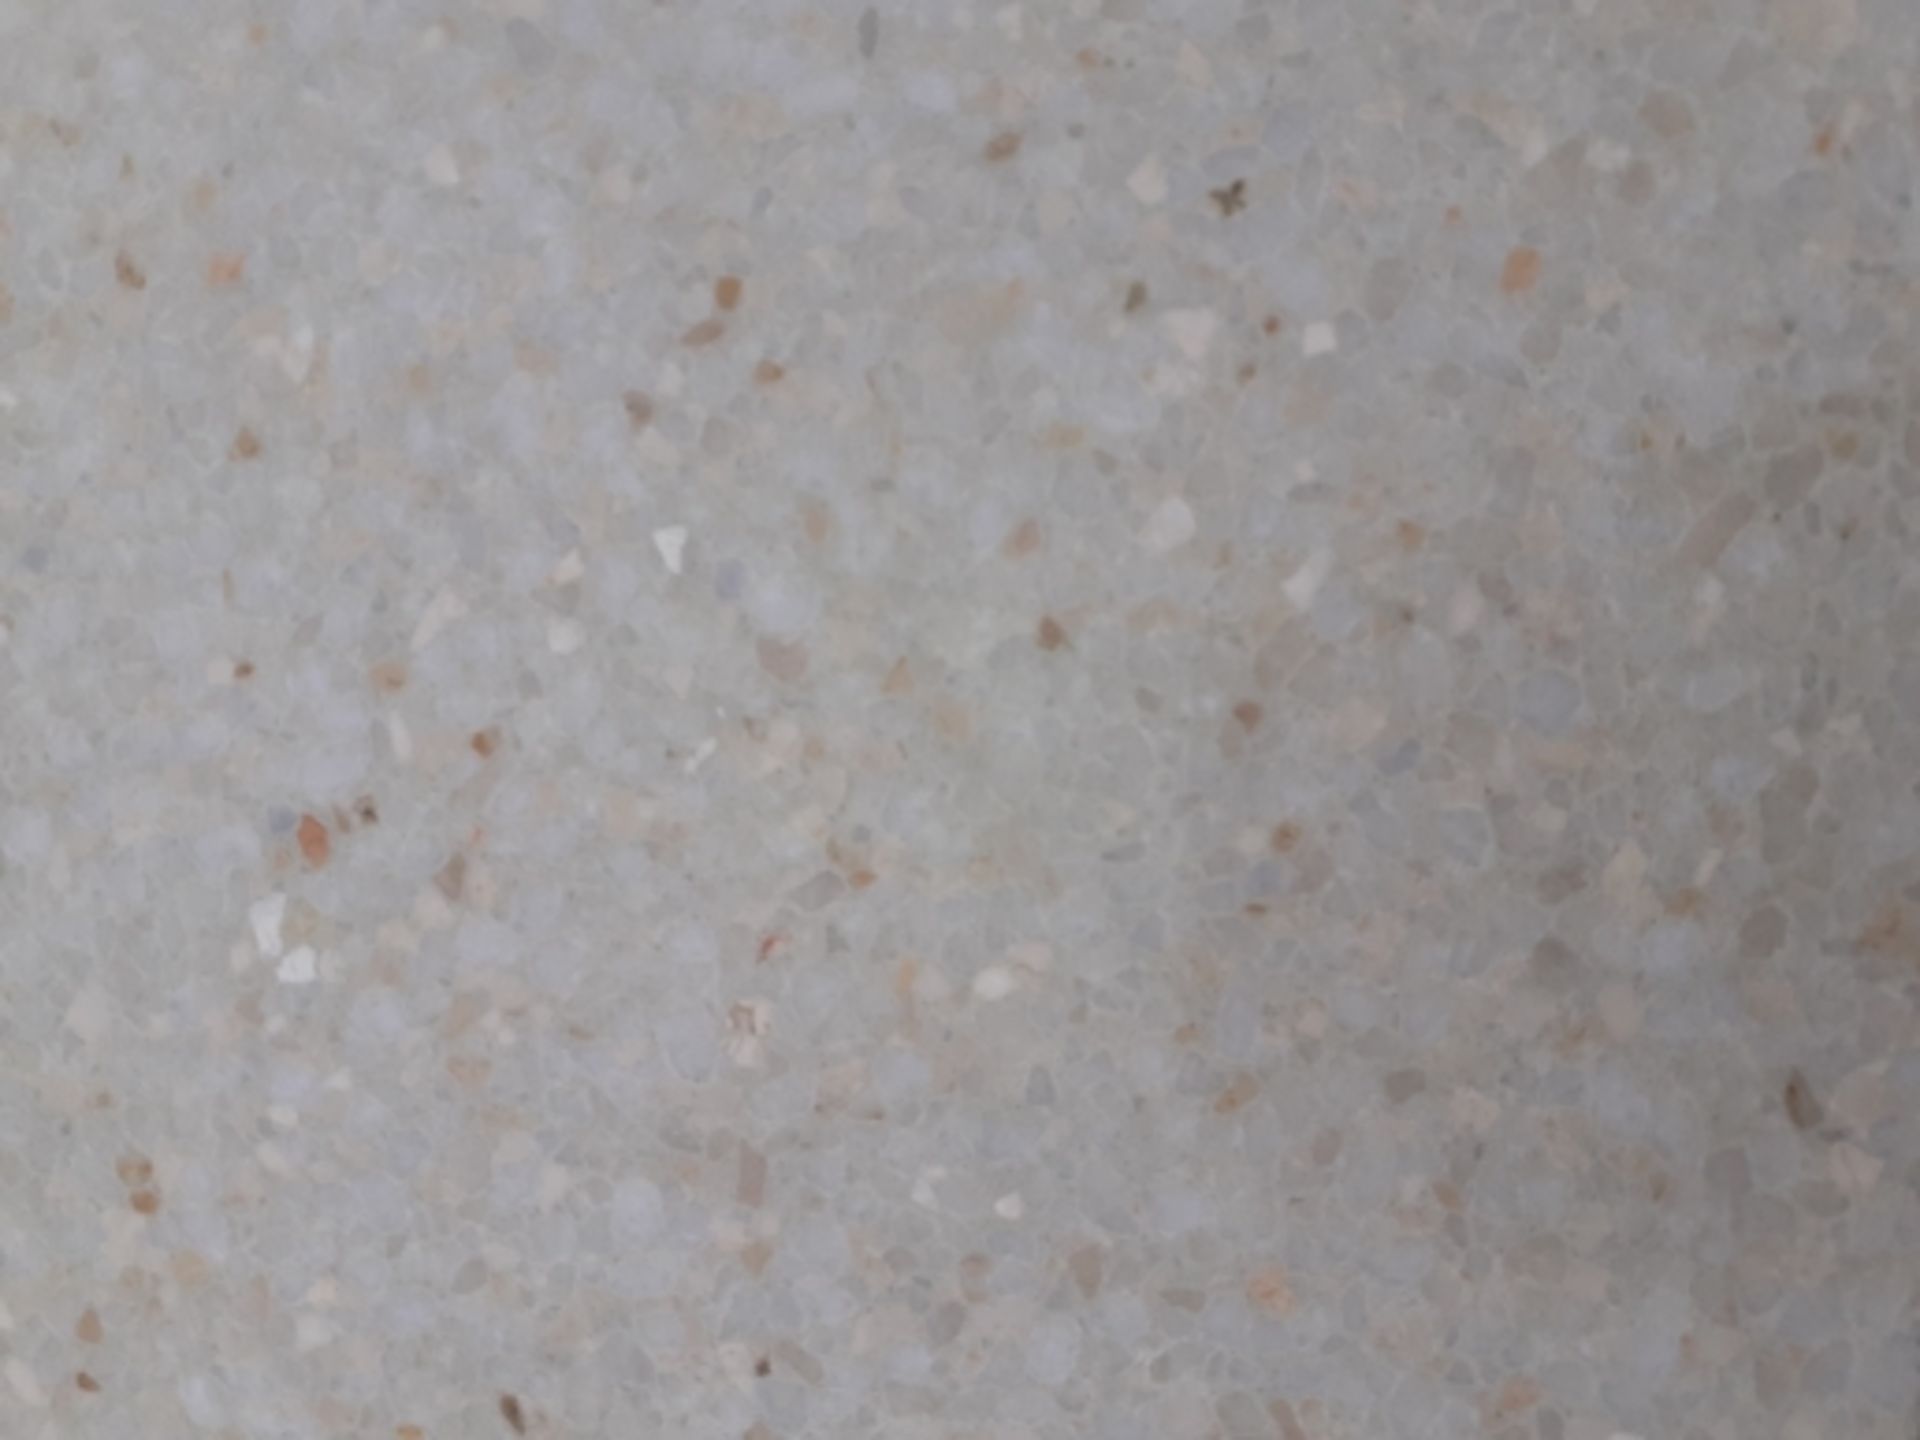 1 PALLET OF BRAND NEW TERRAZZO COMMERCIAL FLOOR TILES (Z30011), COVERS 24 SQUARE YARDS *PLUS VAT* - Image 7 of 15